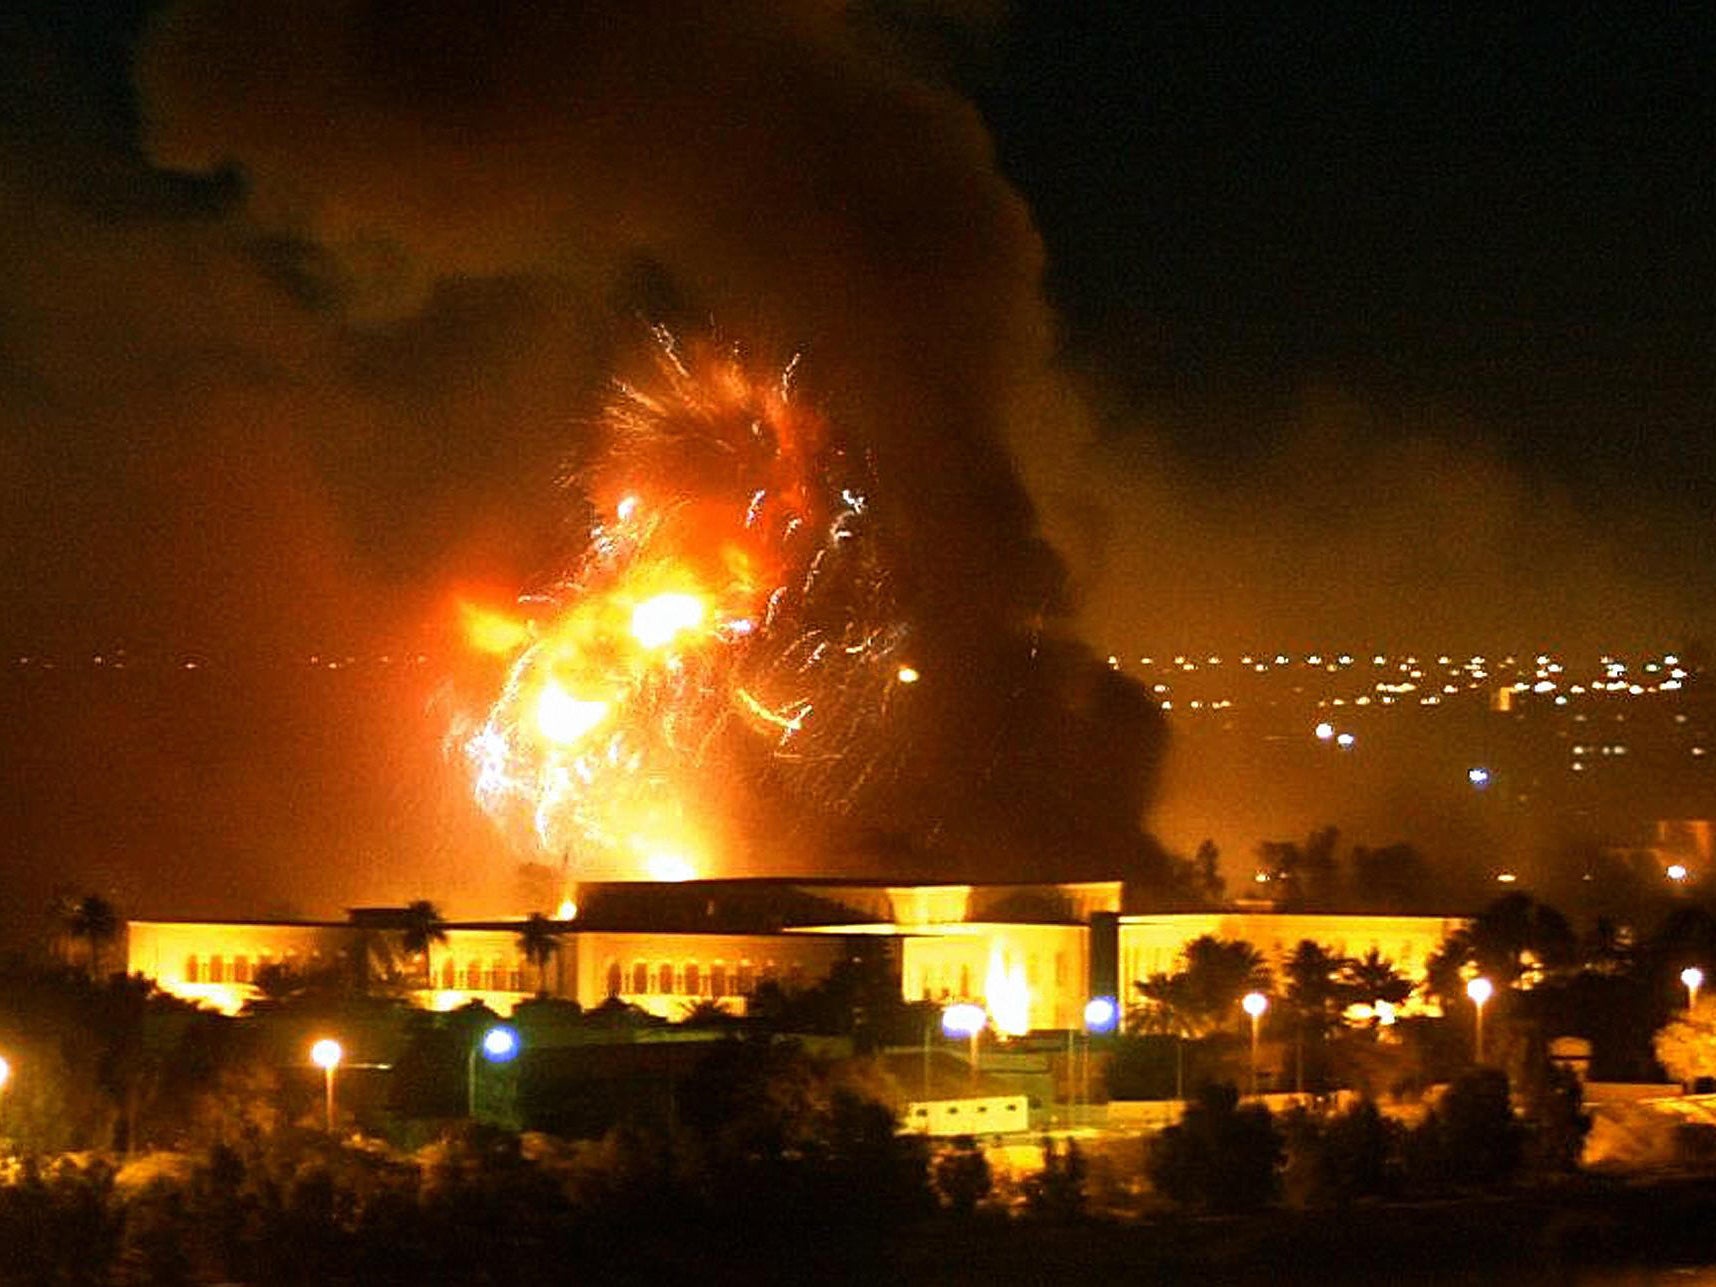 Smoke covers the presidential palace compound during a massive US-led air raid in Baghdad, March 2003